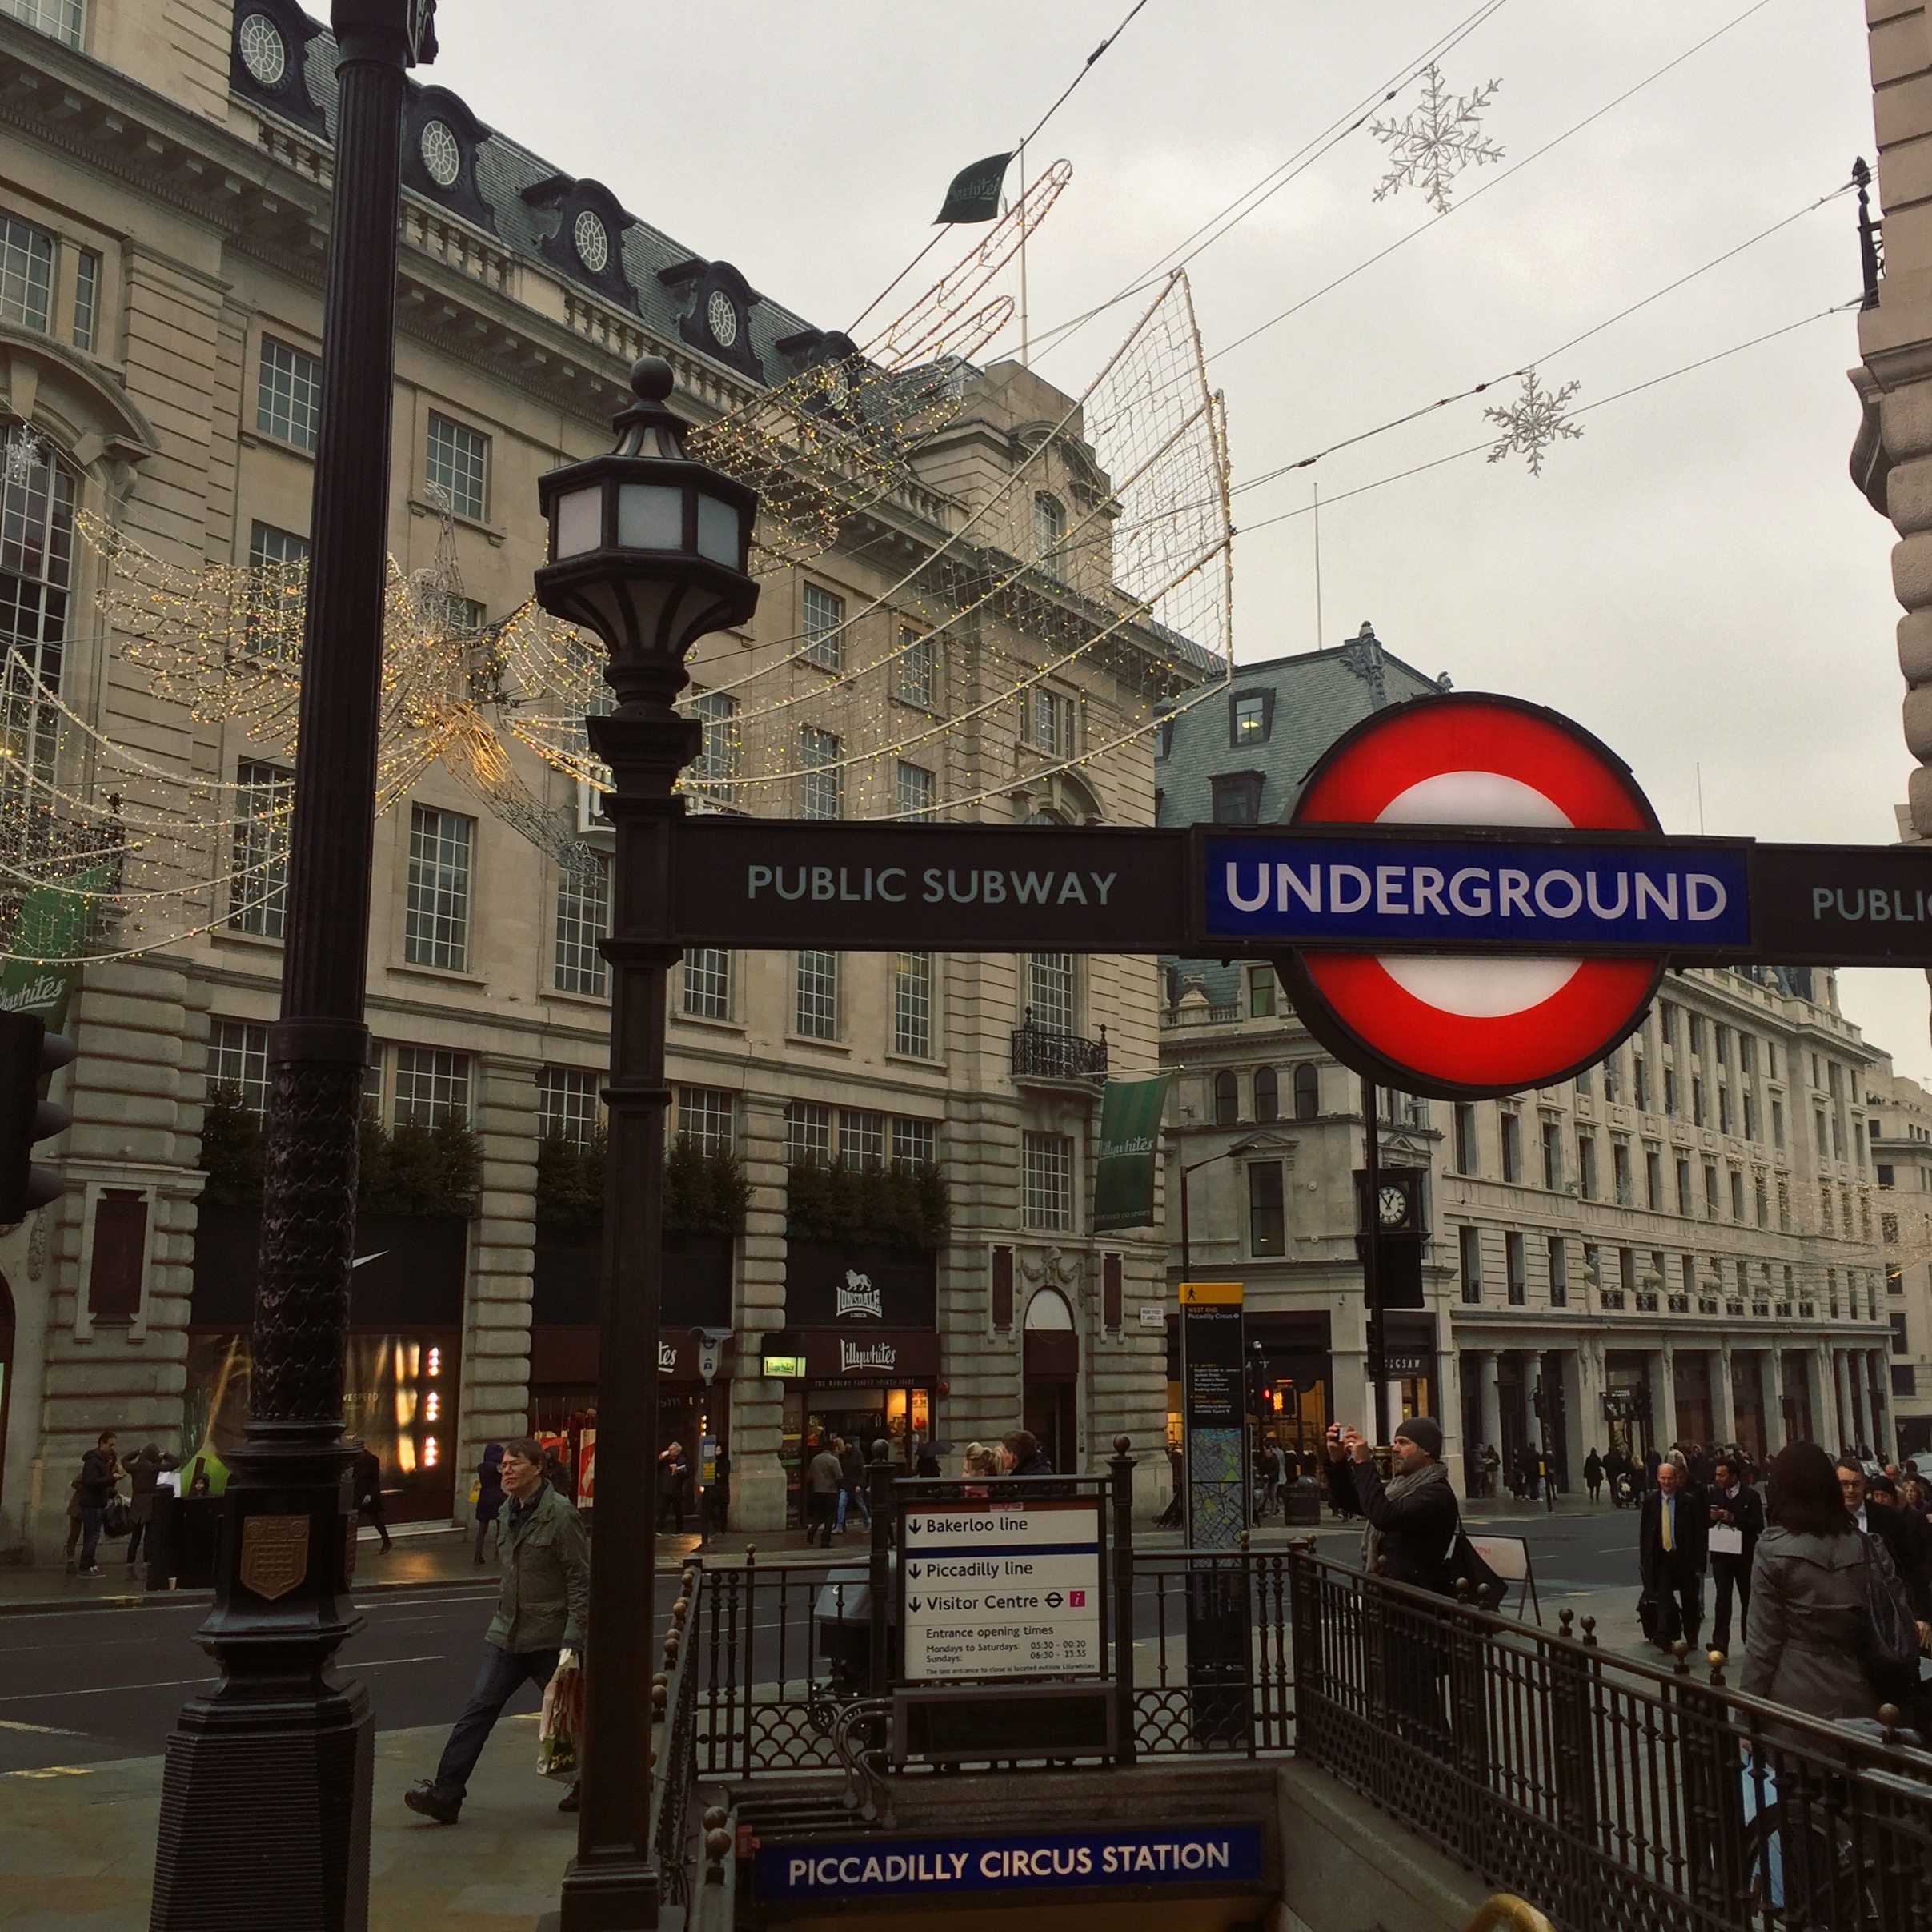 Ein paar Tage in London - Piccadilly Circus